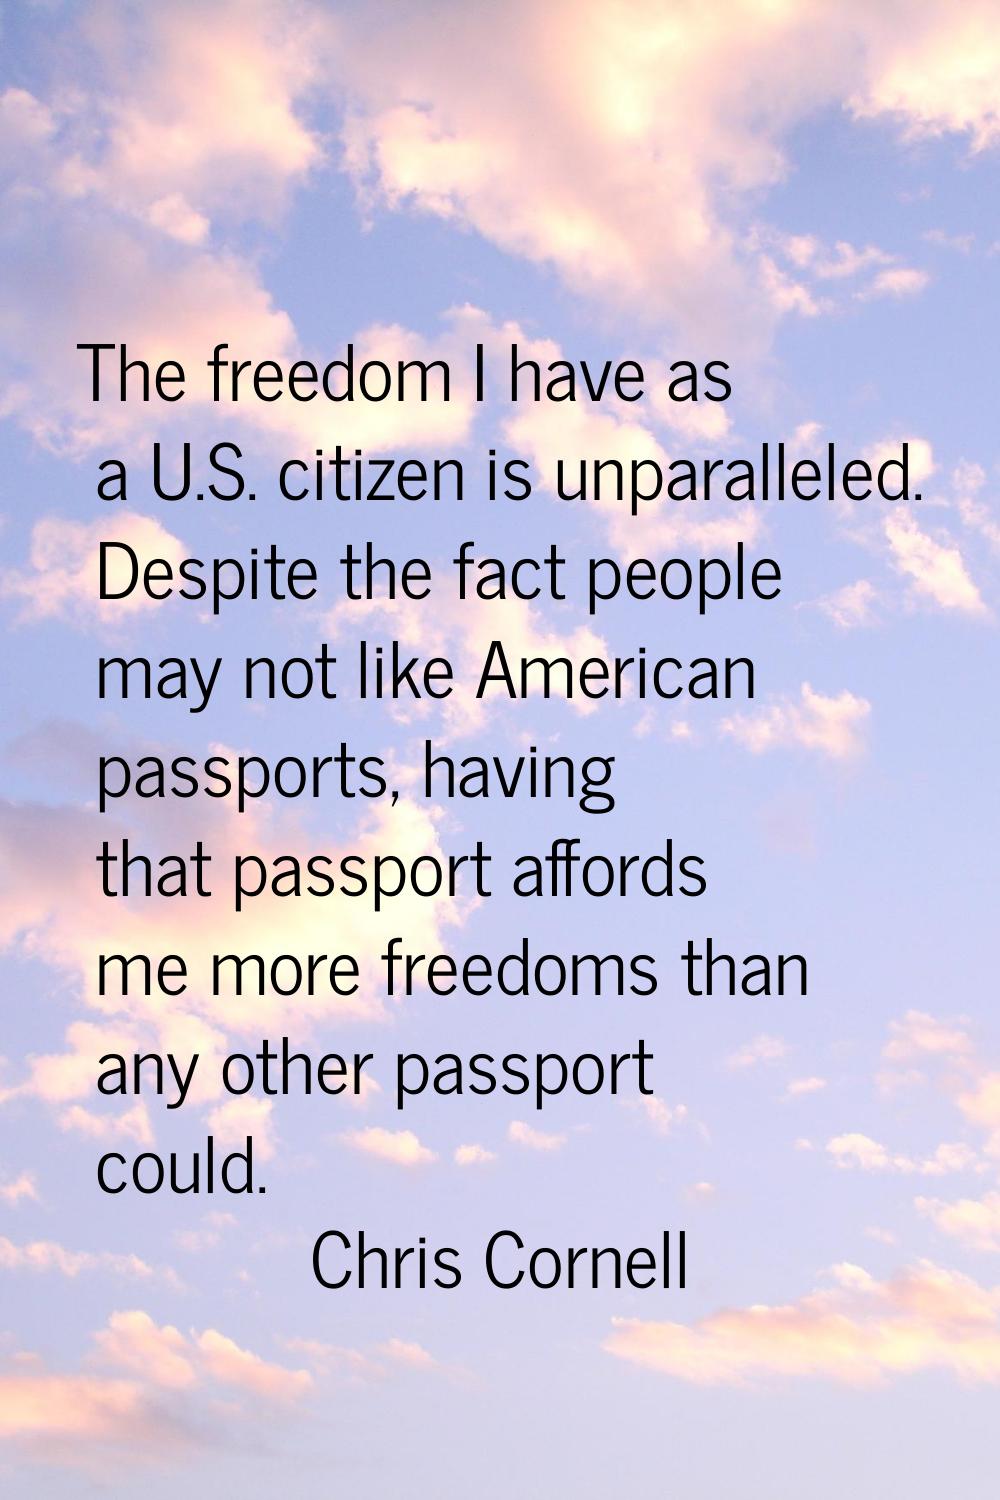 The freedom I have as a U.S. citizen is unparalleled. Despite the fact people may not like American